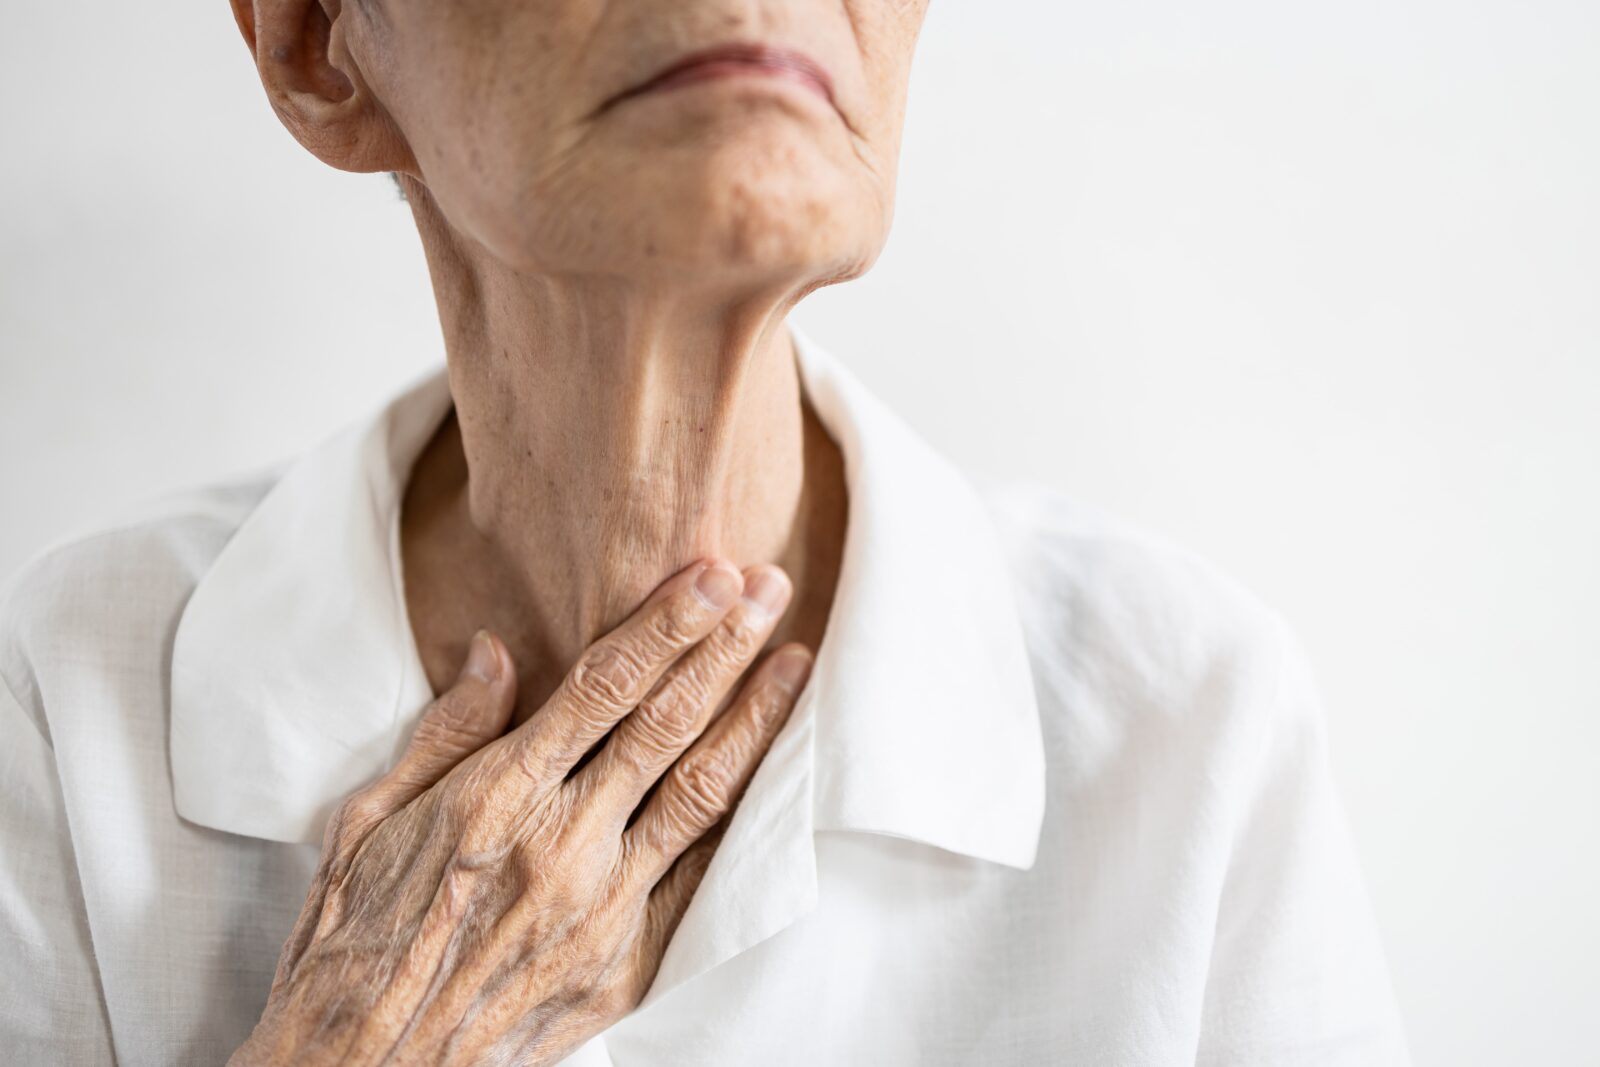 Asian senior patient touching neck with her hand,old elderly has sore throat,foreign body stuck in throat,painful swallowing,pain cough,inflammation of the larynx,throat problems or laryngitis disease